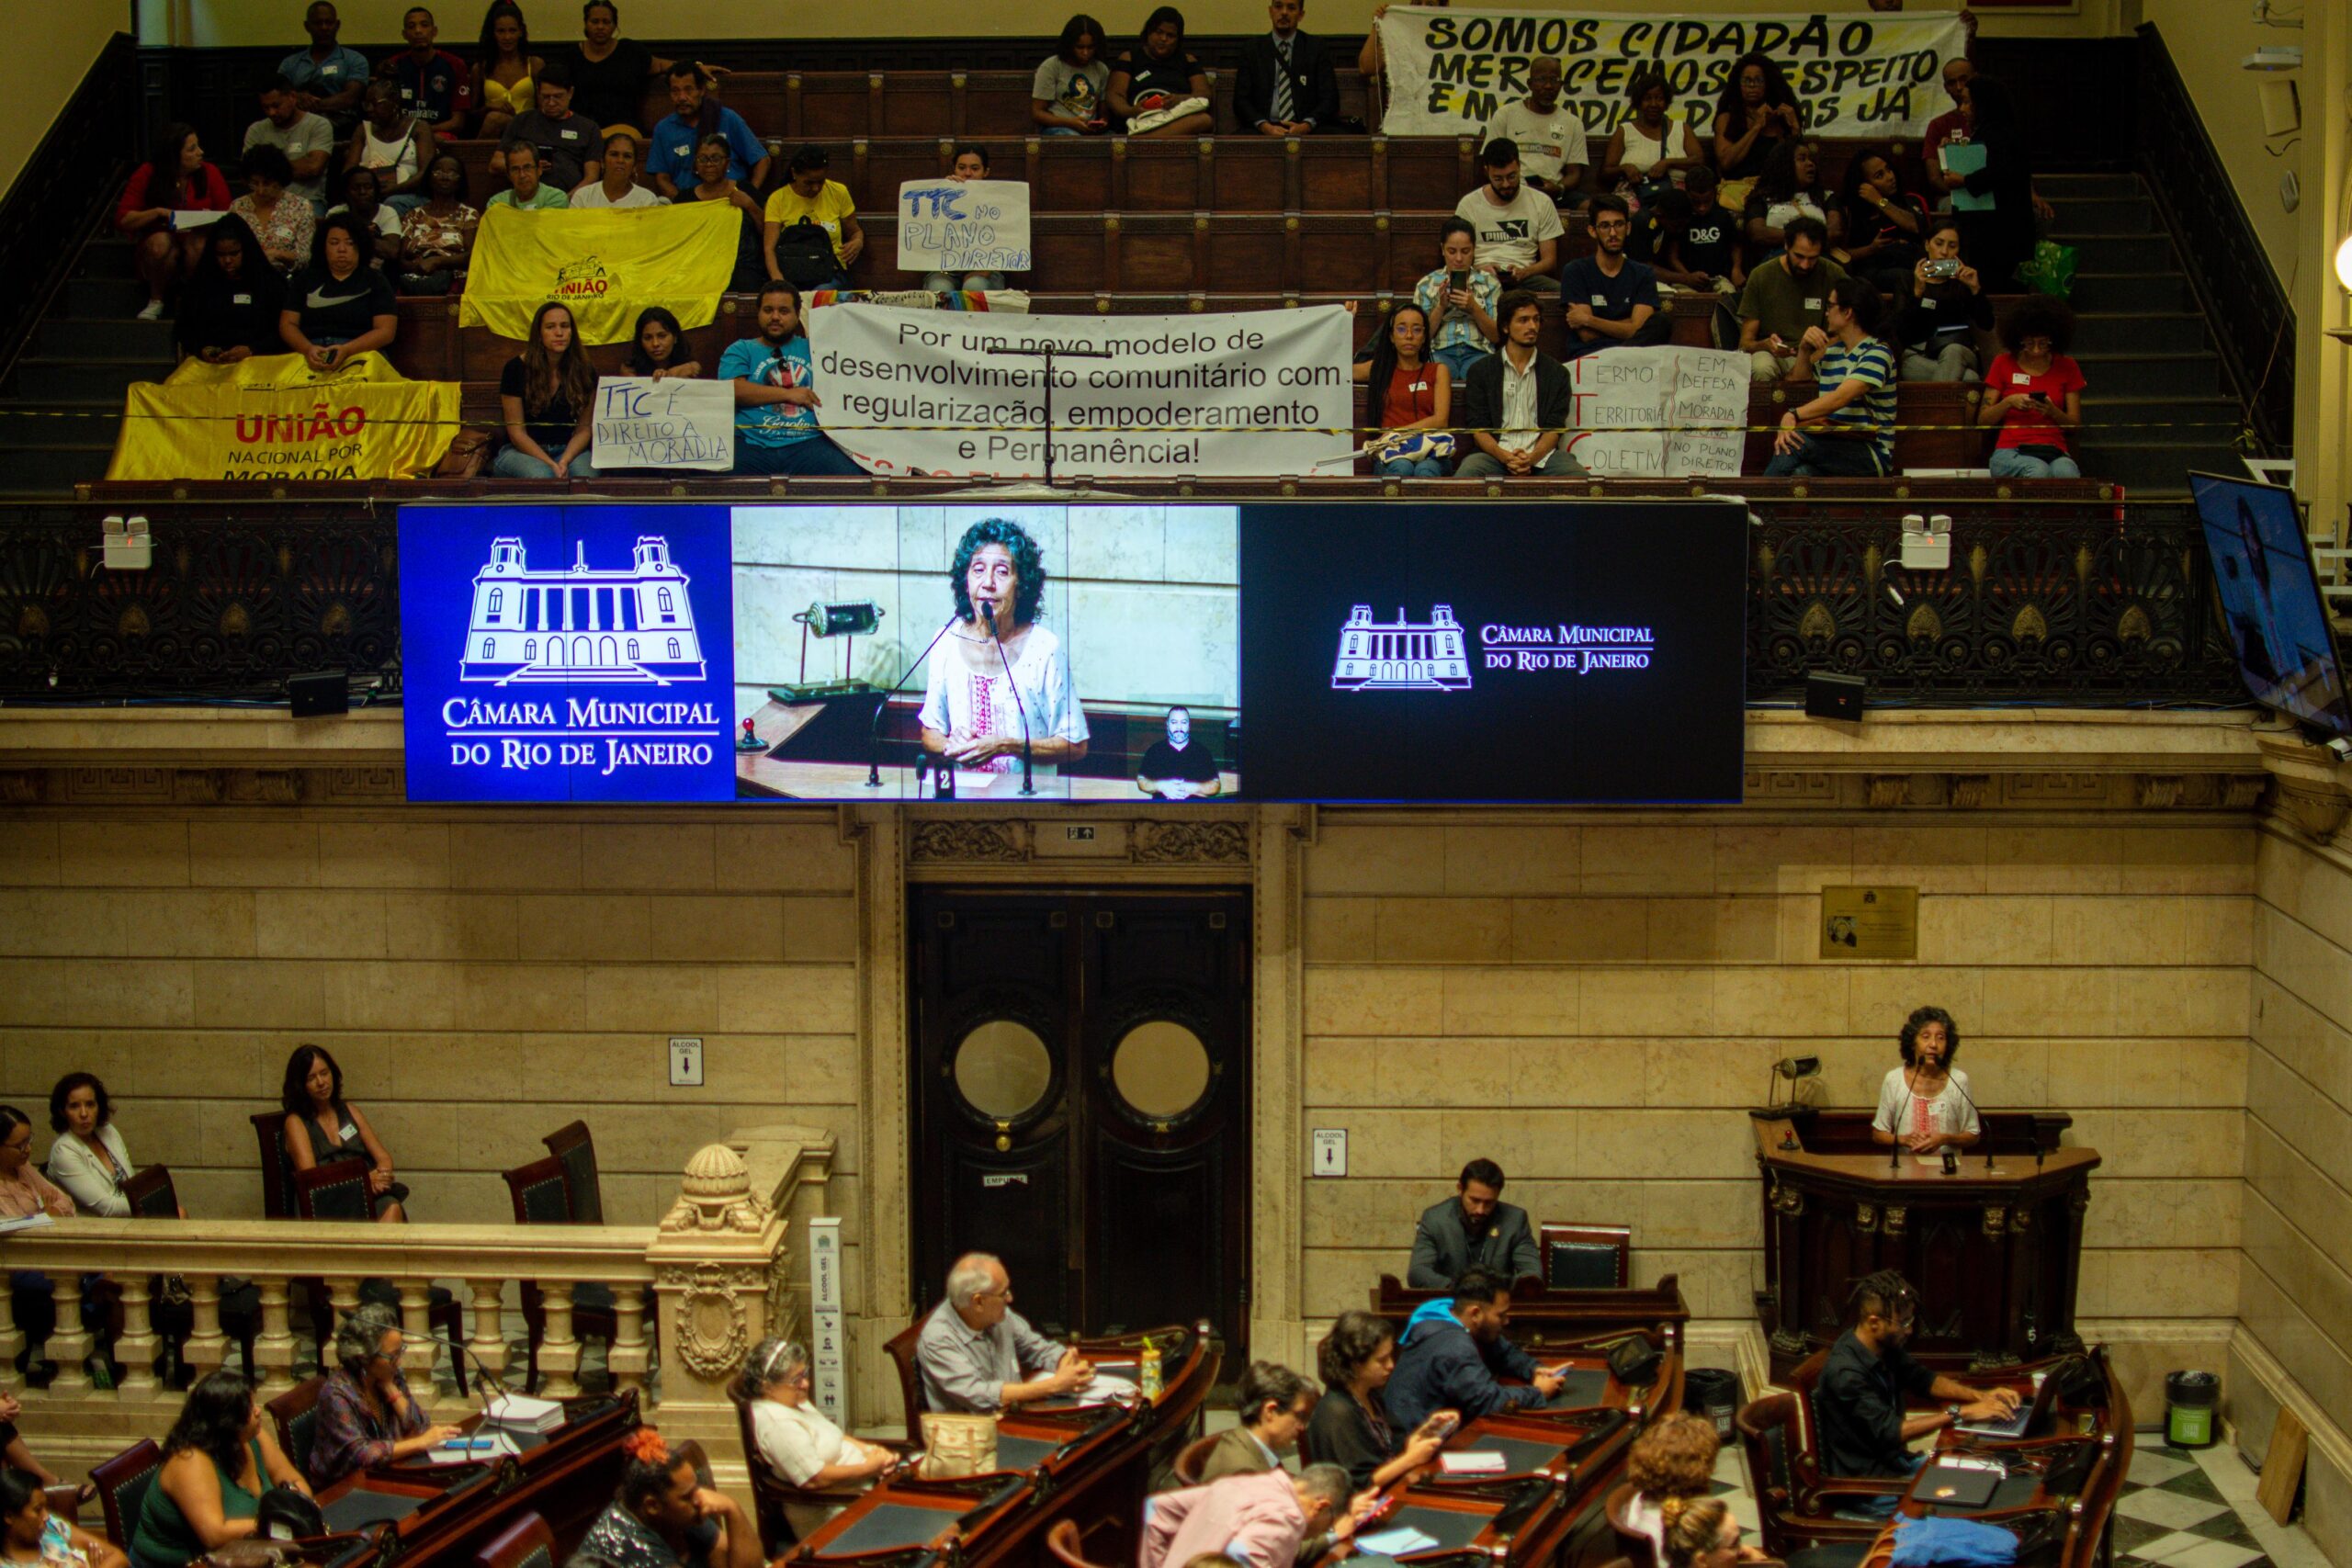 Maria da Penha gave an emphatic talk in support of the right to housing at the City Council Chambers on April 12.